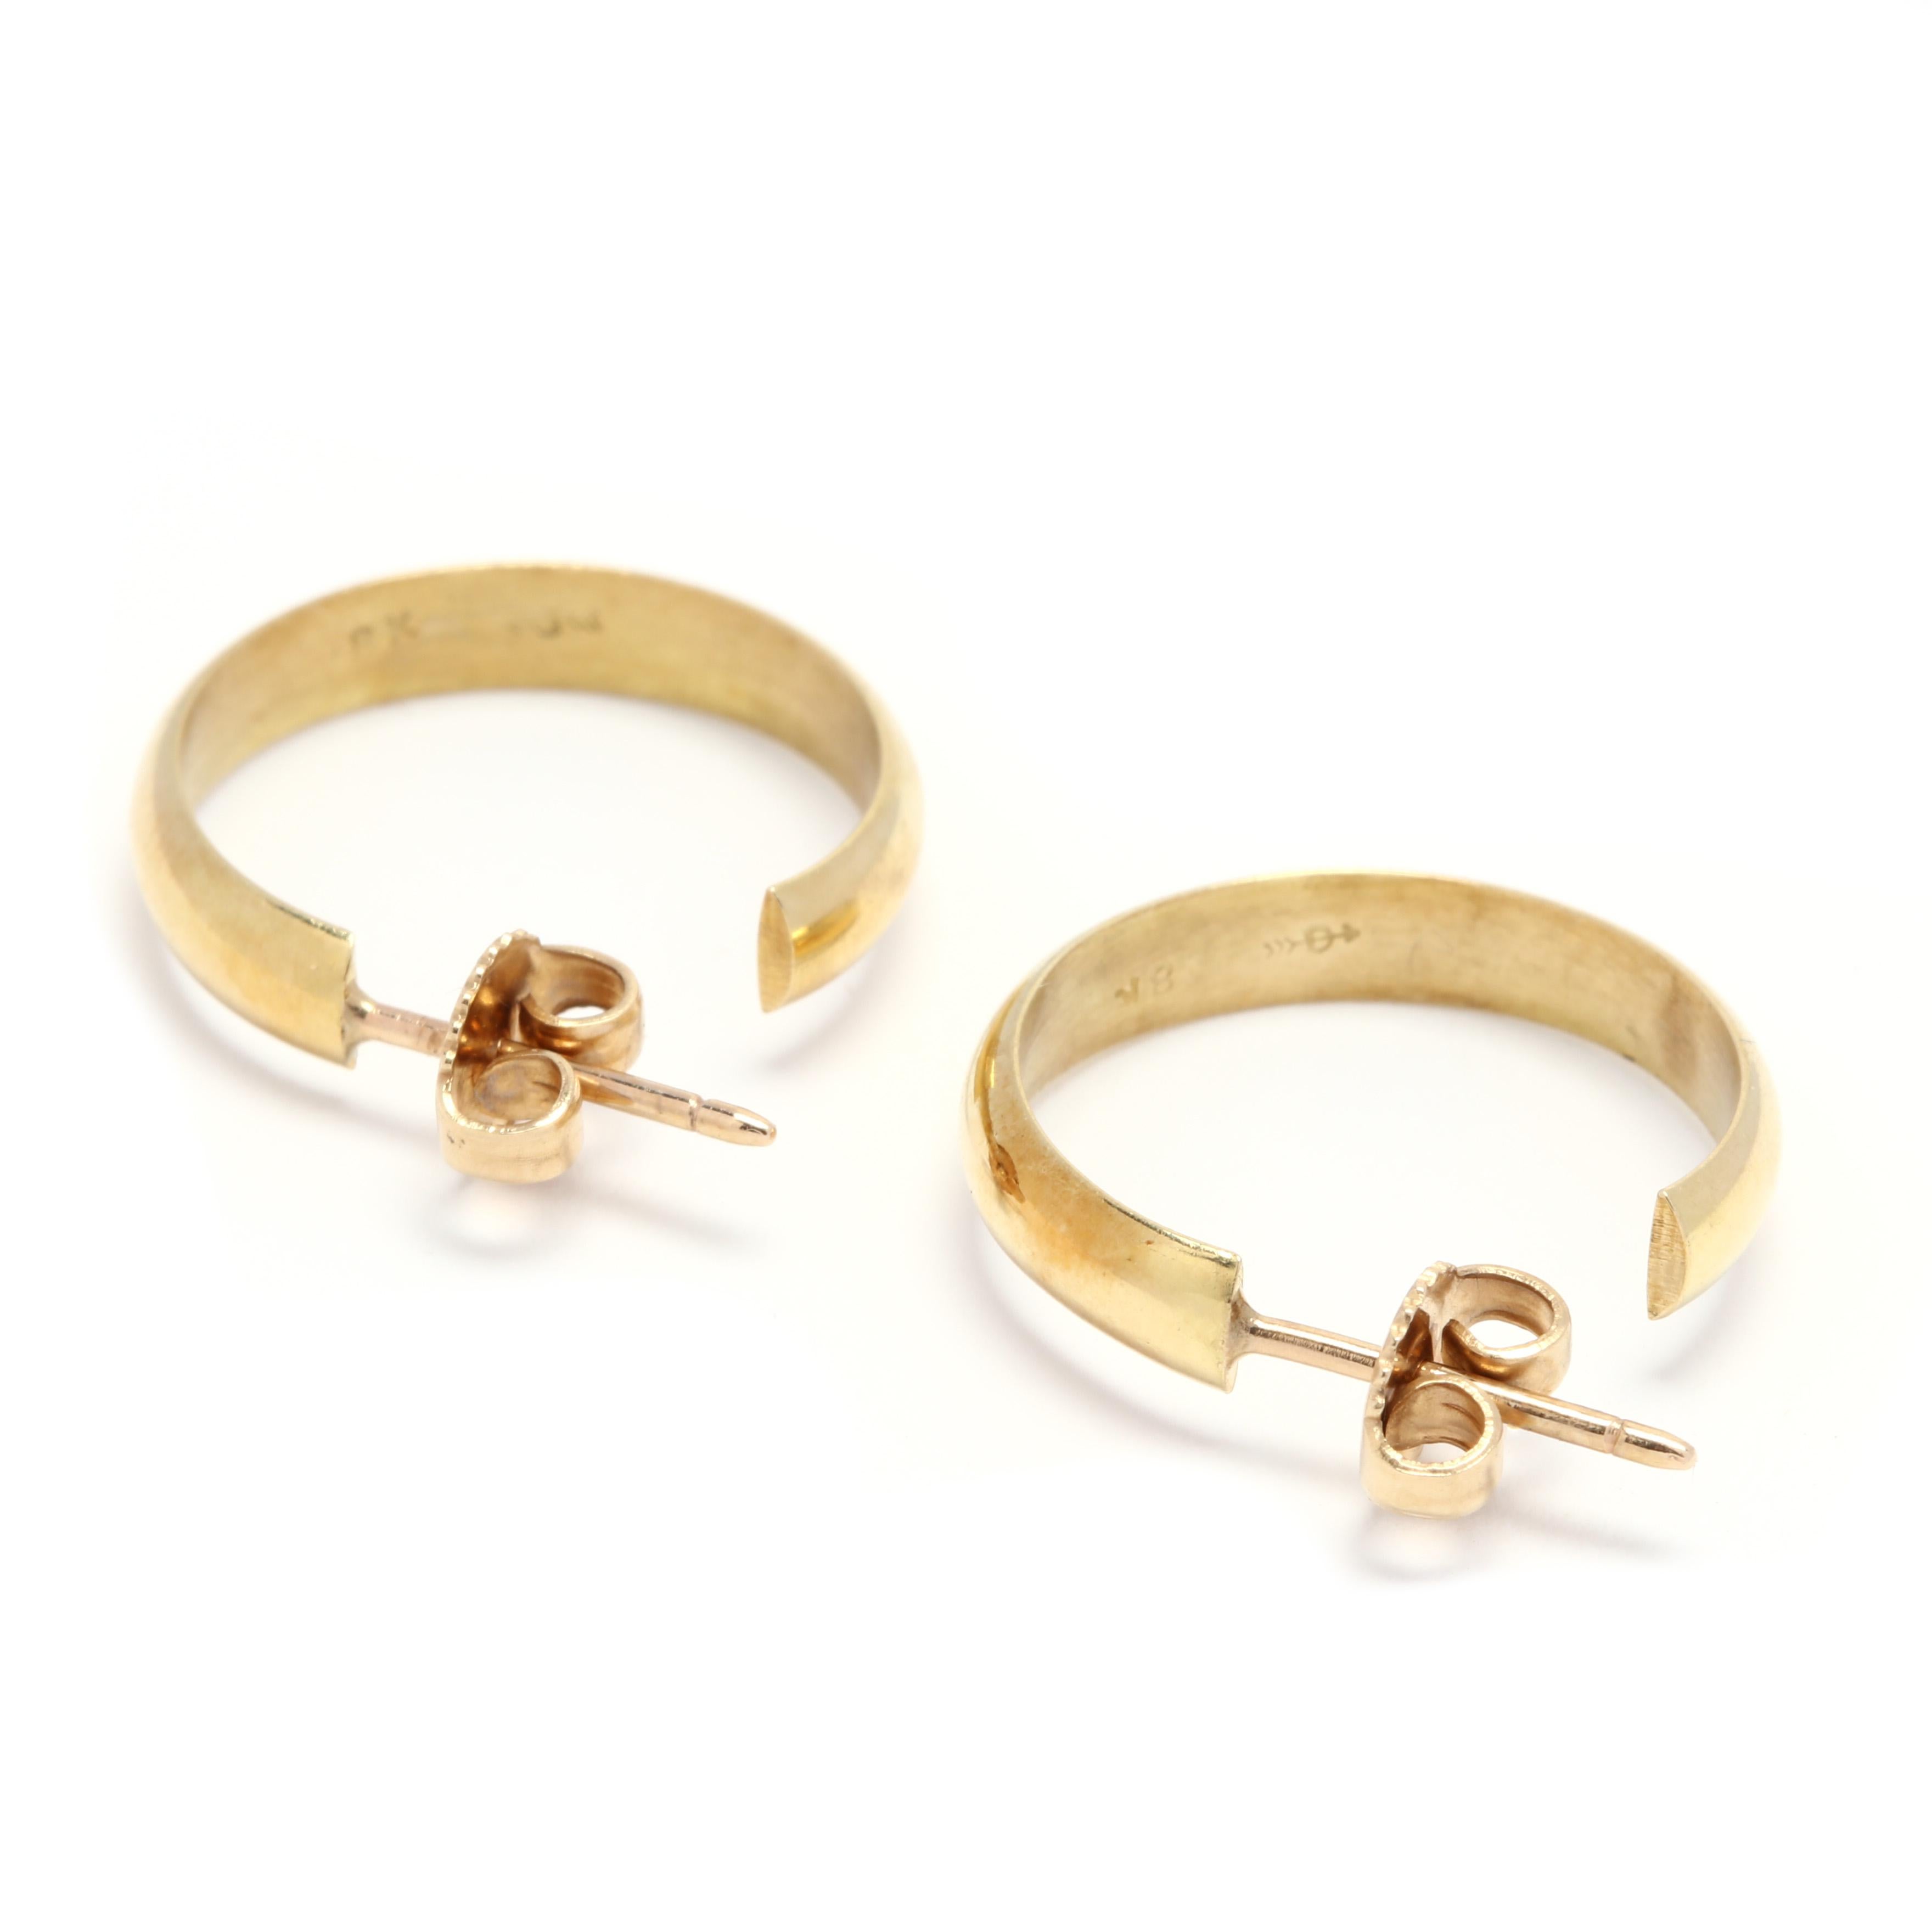 A pair of 18 karat yellow gold flat hoop earrings. These earrings feature a slightly curved polished hoop earring with push back closures.

Length: 3/4 in.

Width: 3.65 mm

3.49 dwts.

* Please note that this is a vintage item and may show signs of